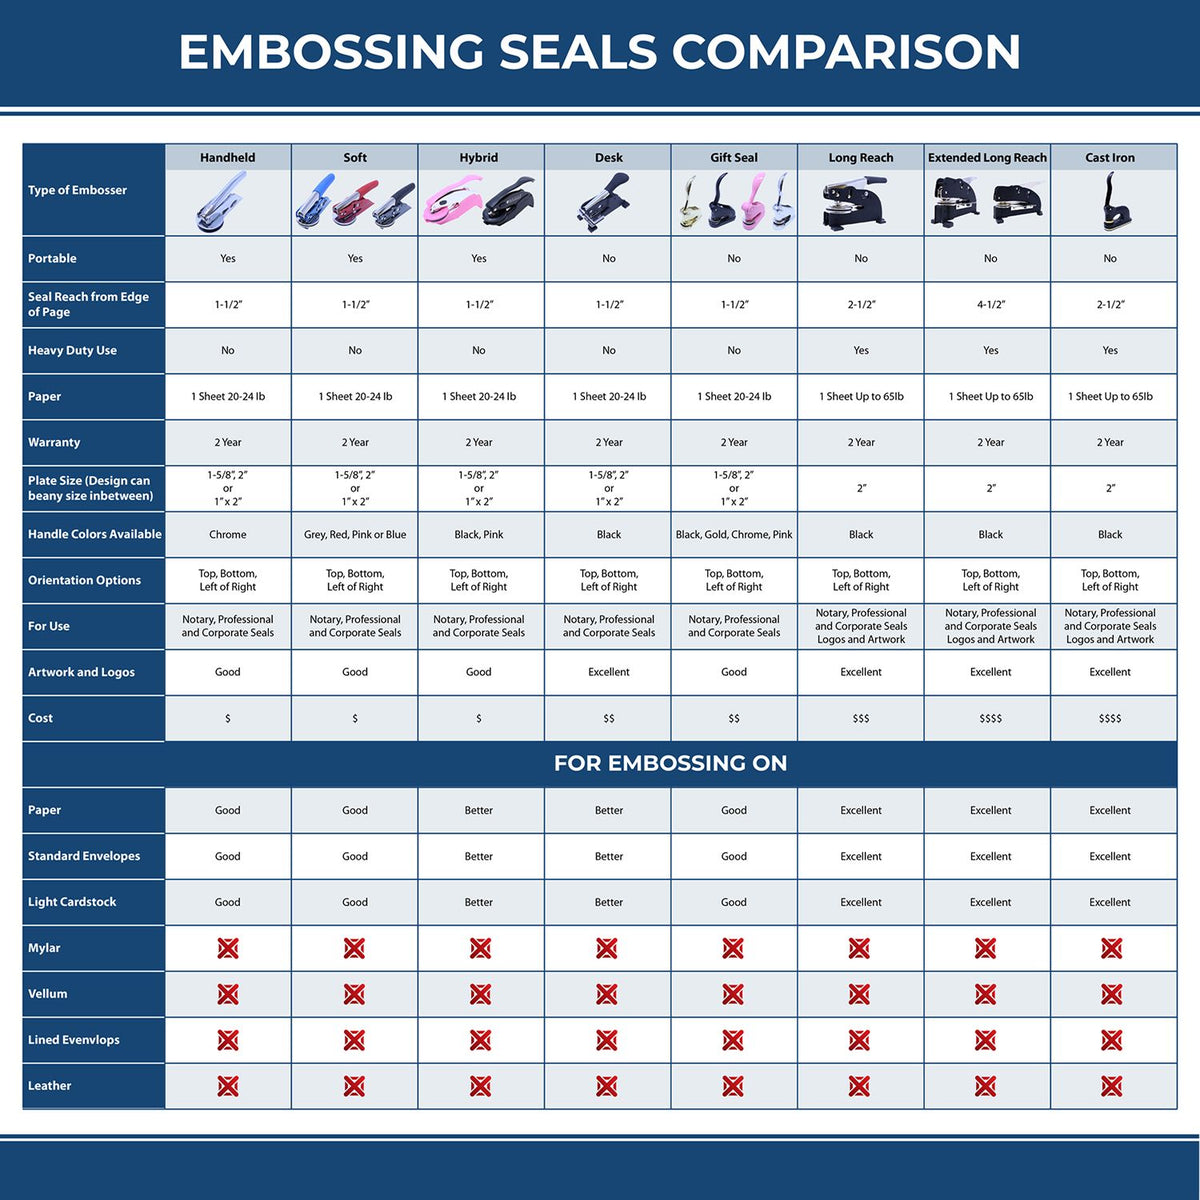 A comparison chart for the different types of mount models available for the Soft Guam Professional Engineer Seal.